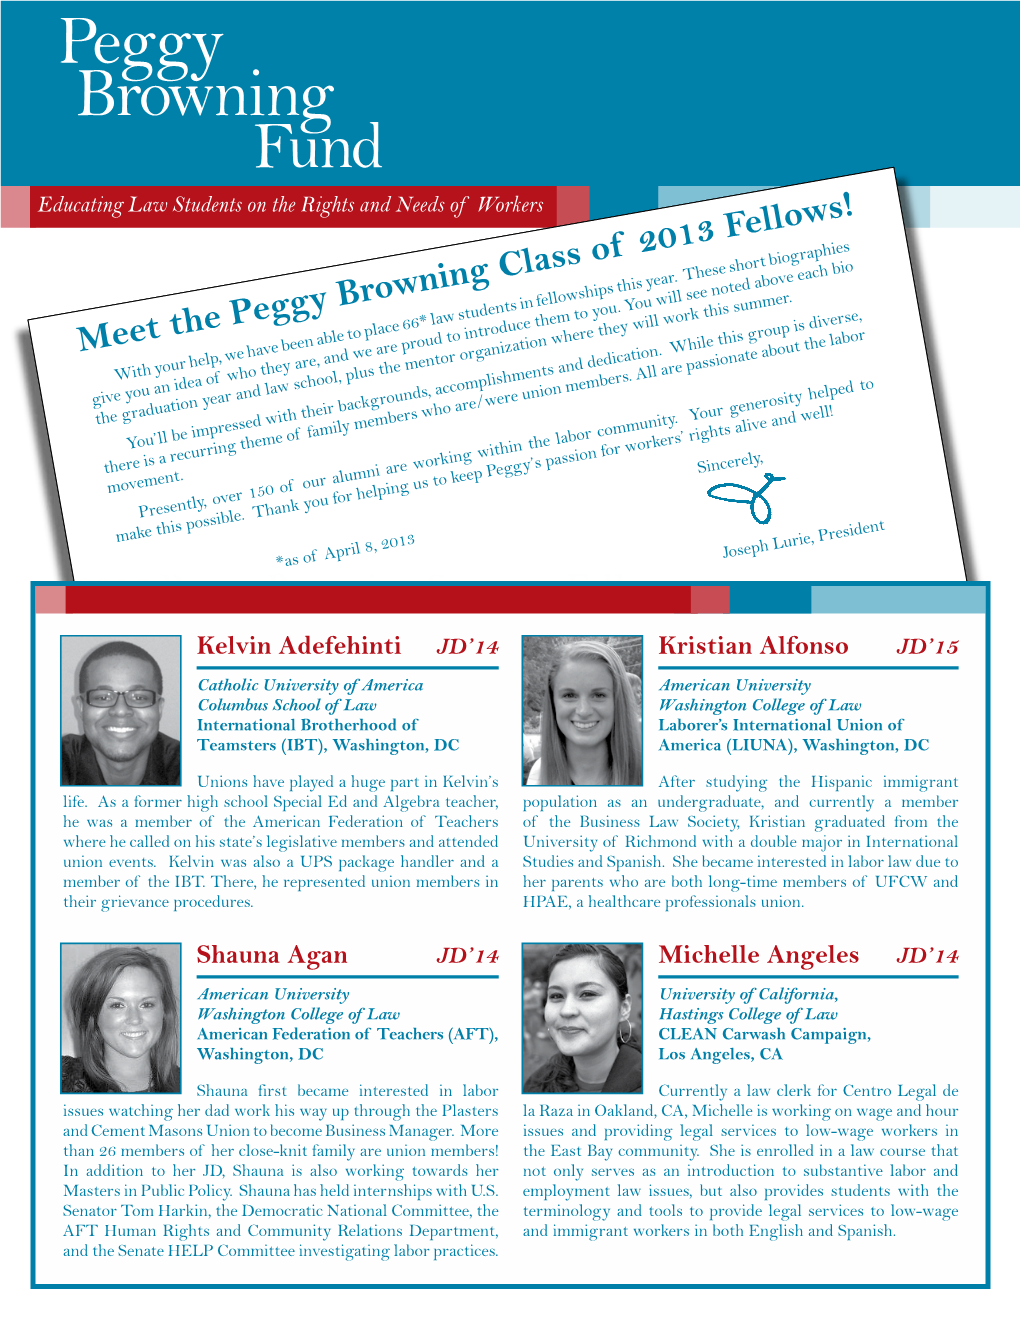 Meet the Peggy Browning Class of 2013 Fellows!